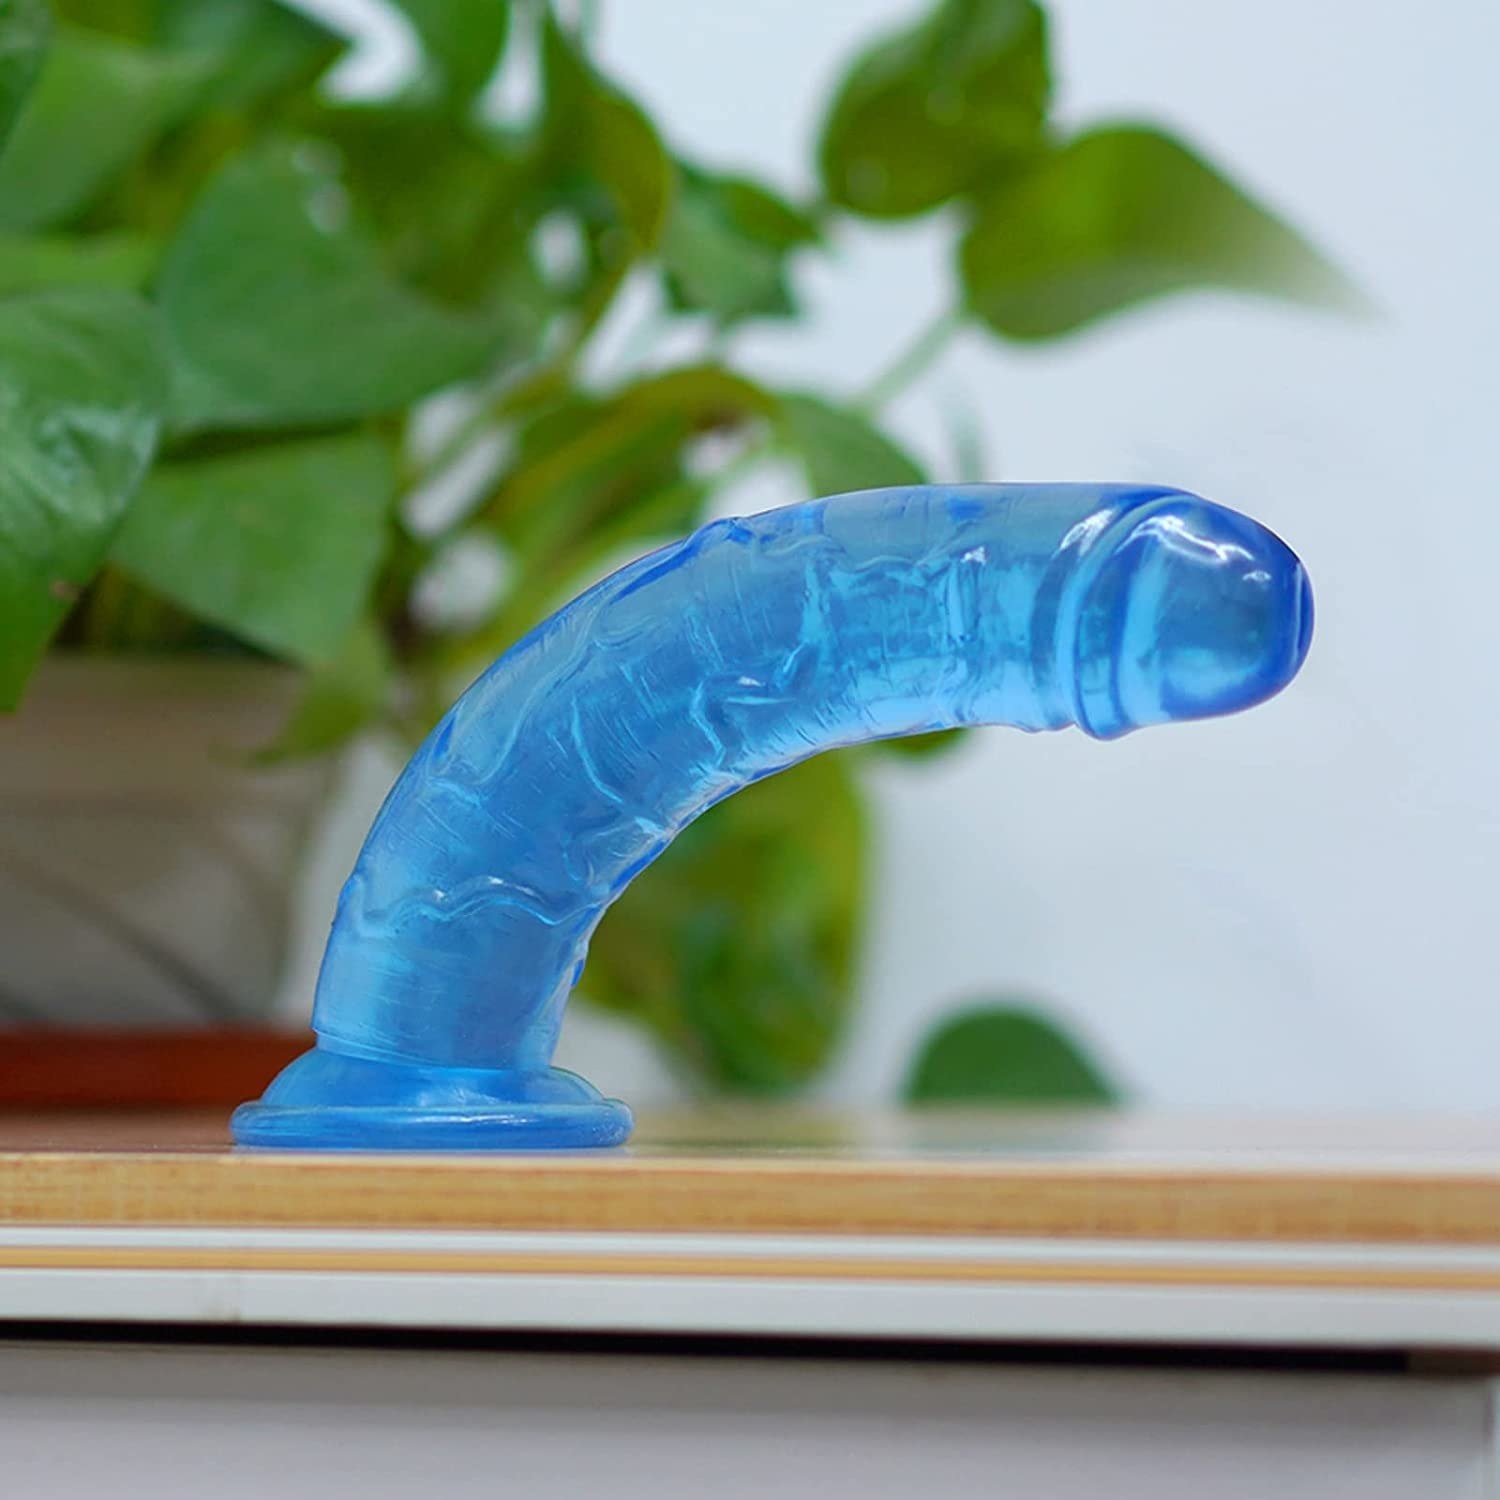 The dildo on a table beside a plant